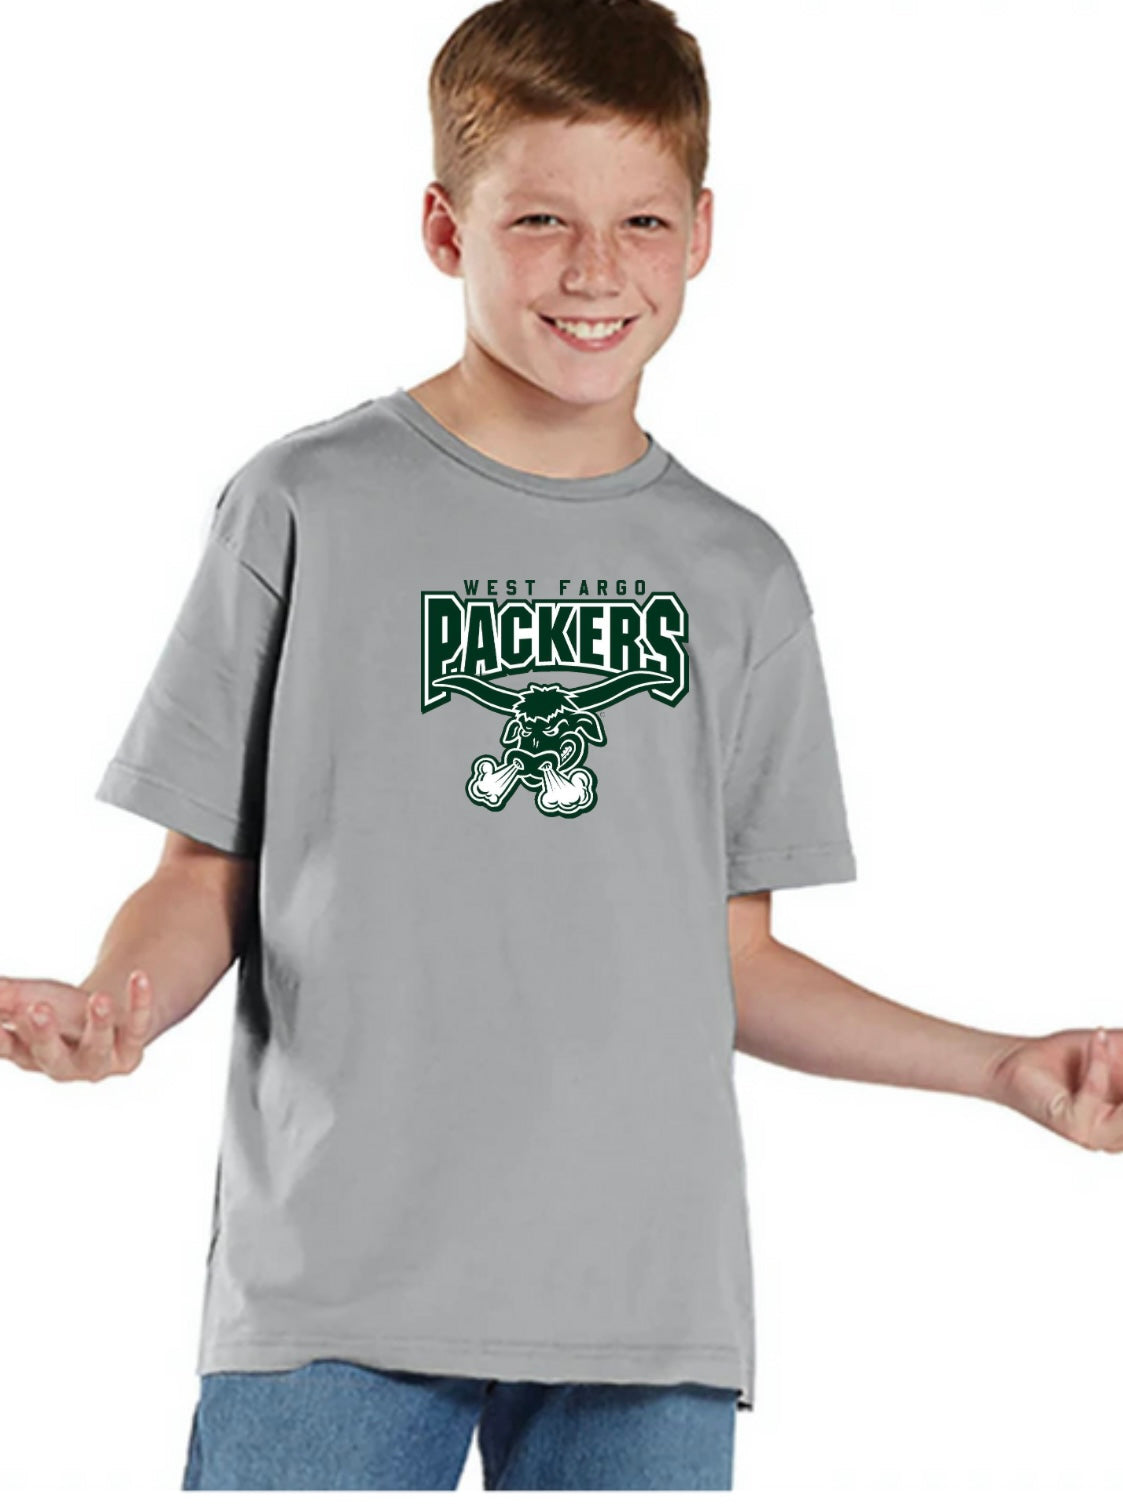 West Fargo Packers Youth Dry Fit Tee